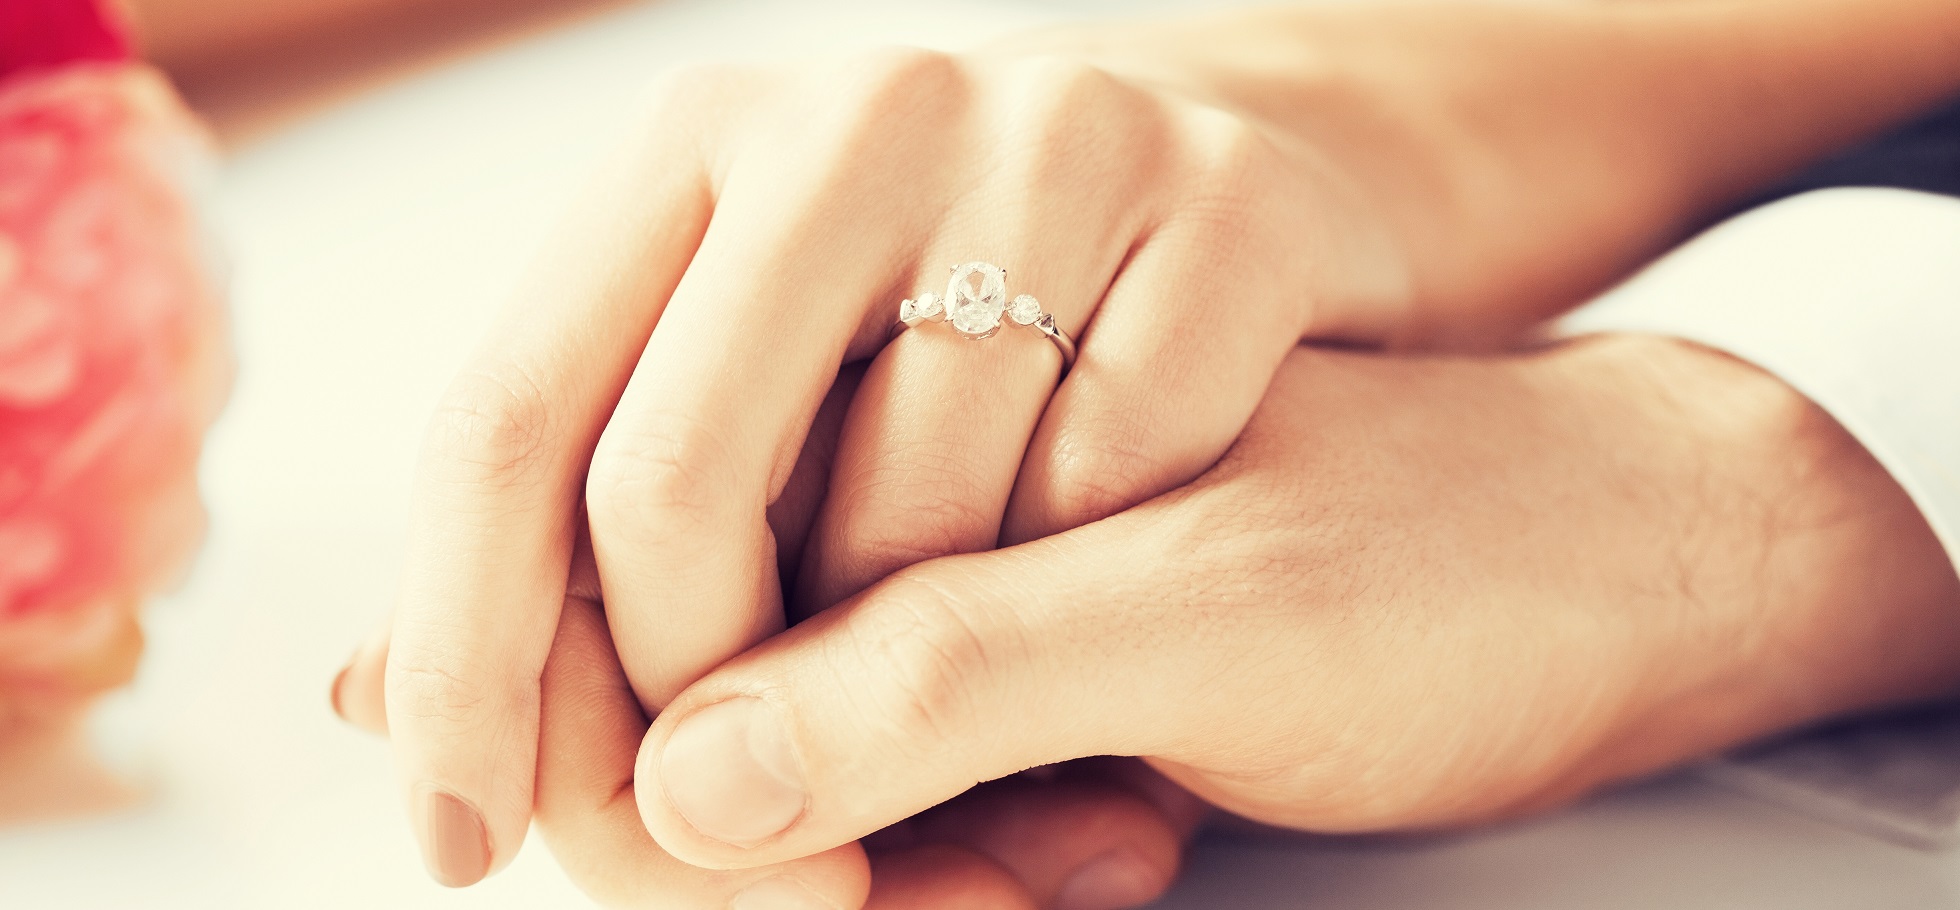 Promise Ring vs Engagement Ring | Meanings and ifferences – Albert Hern